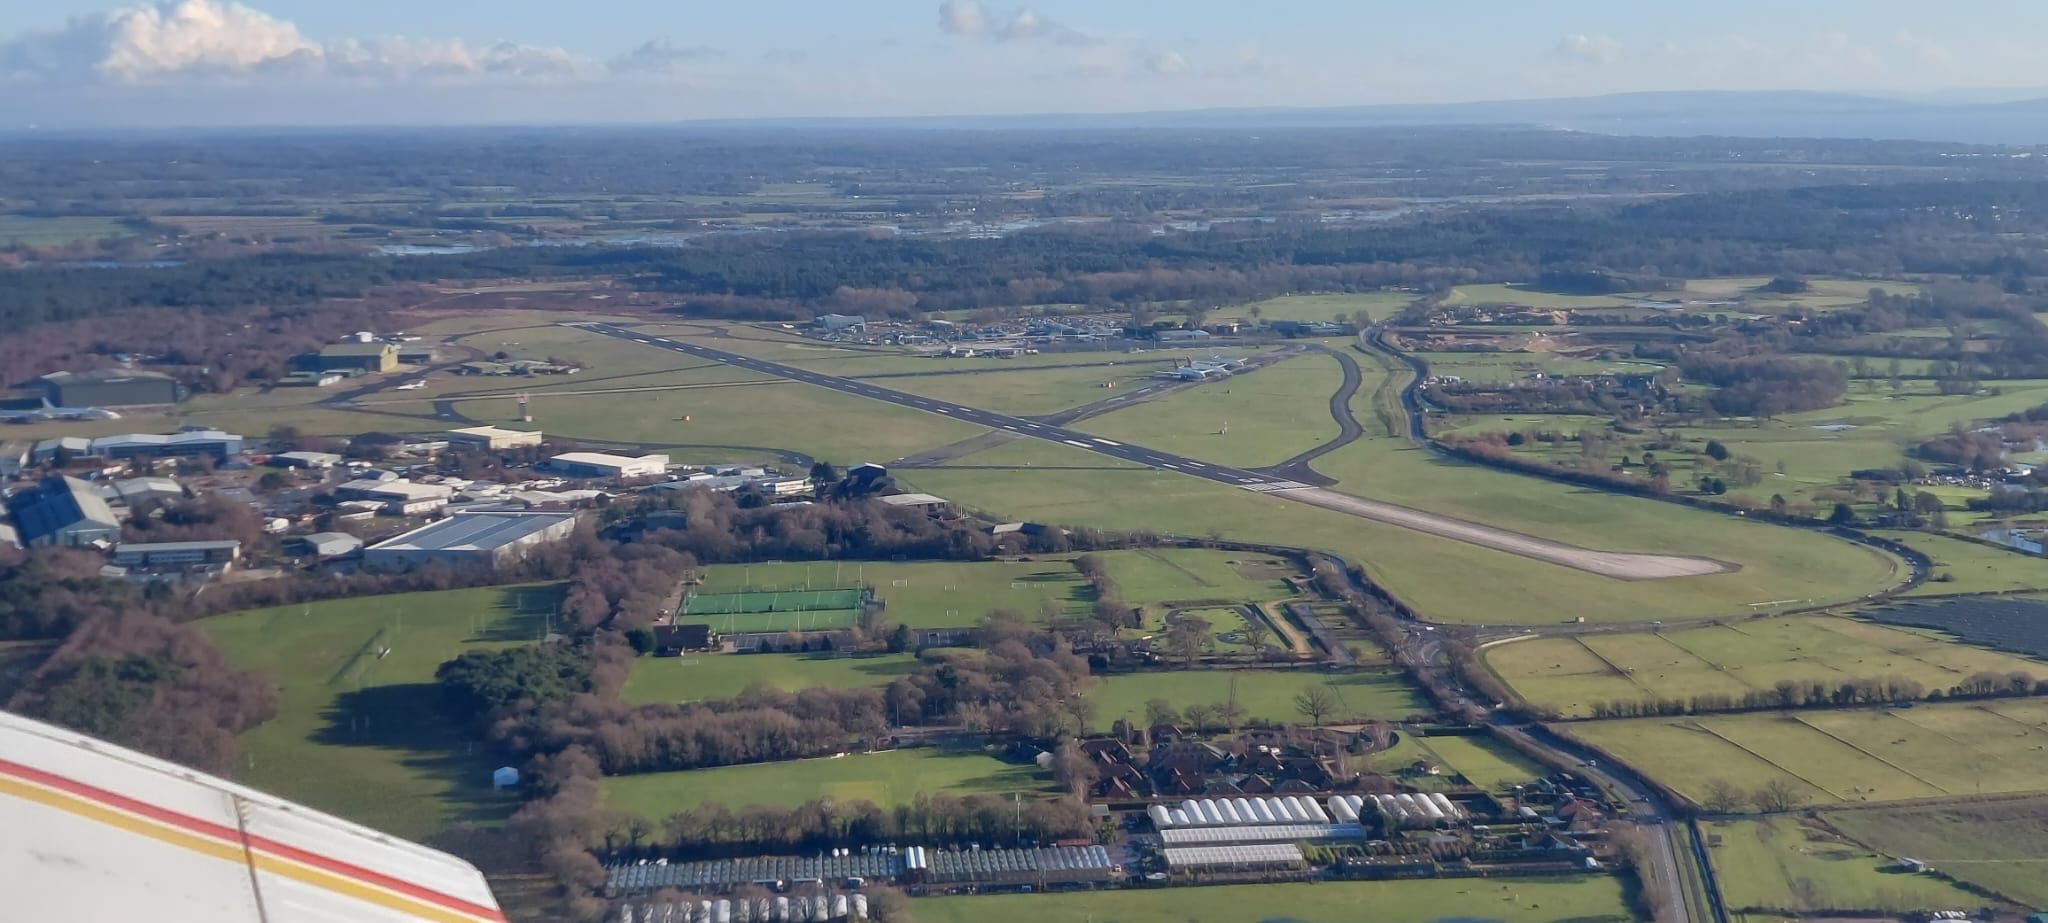 Flying lesson at Bournemouth International Airport in a PA28 aircraft